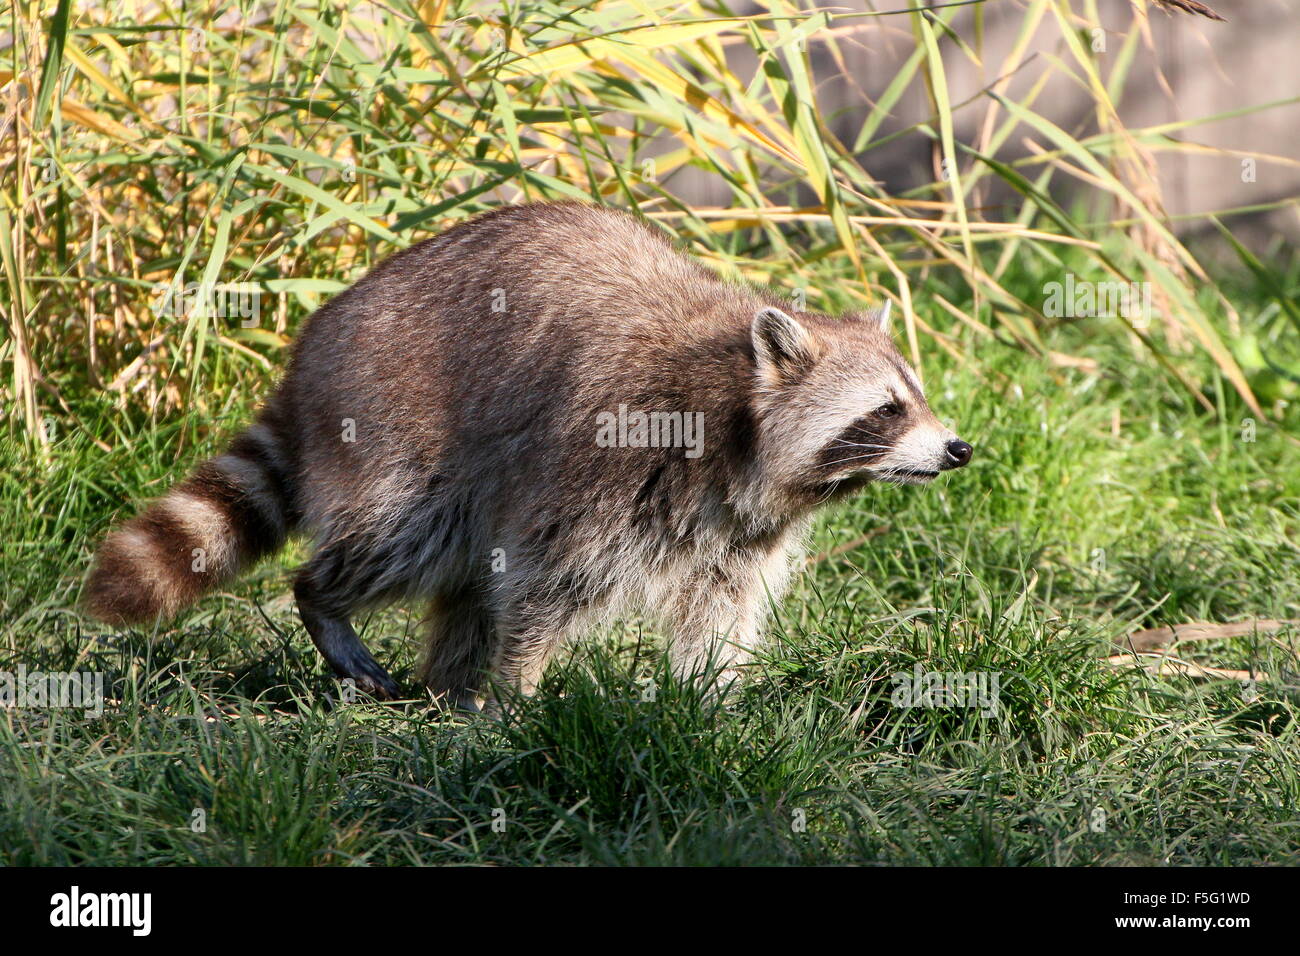 North American raccoon (Procyon lotor) walking in the tall grass Stock Photo